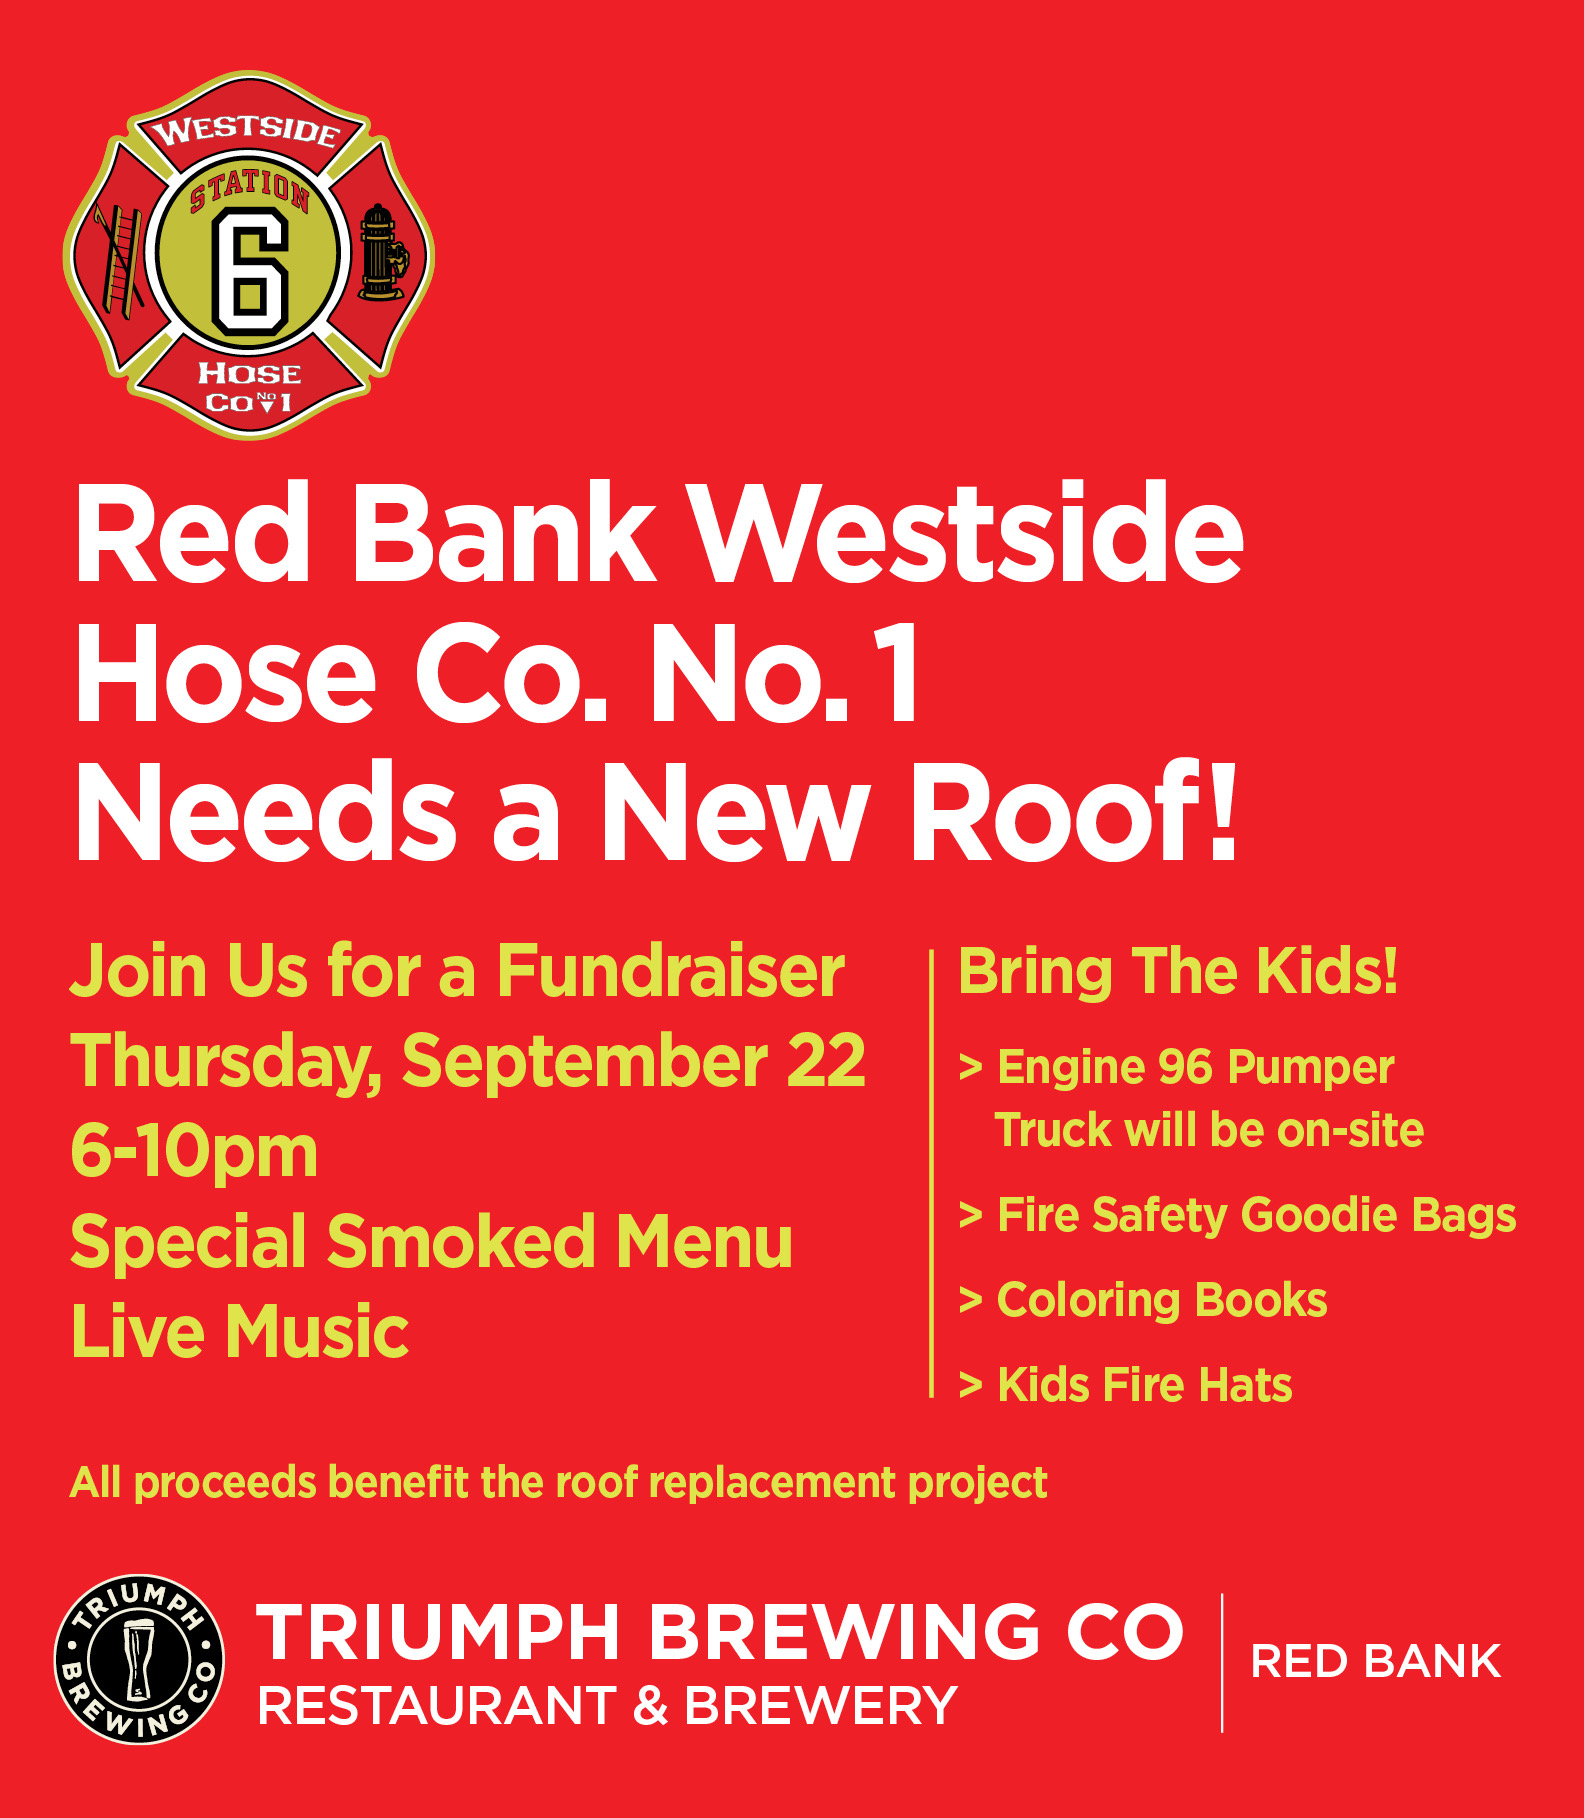 Red Bank Westside Hose Co. No. 1 Needs a New Roof!